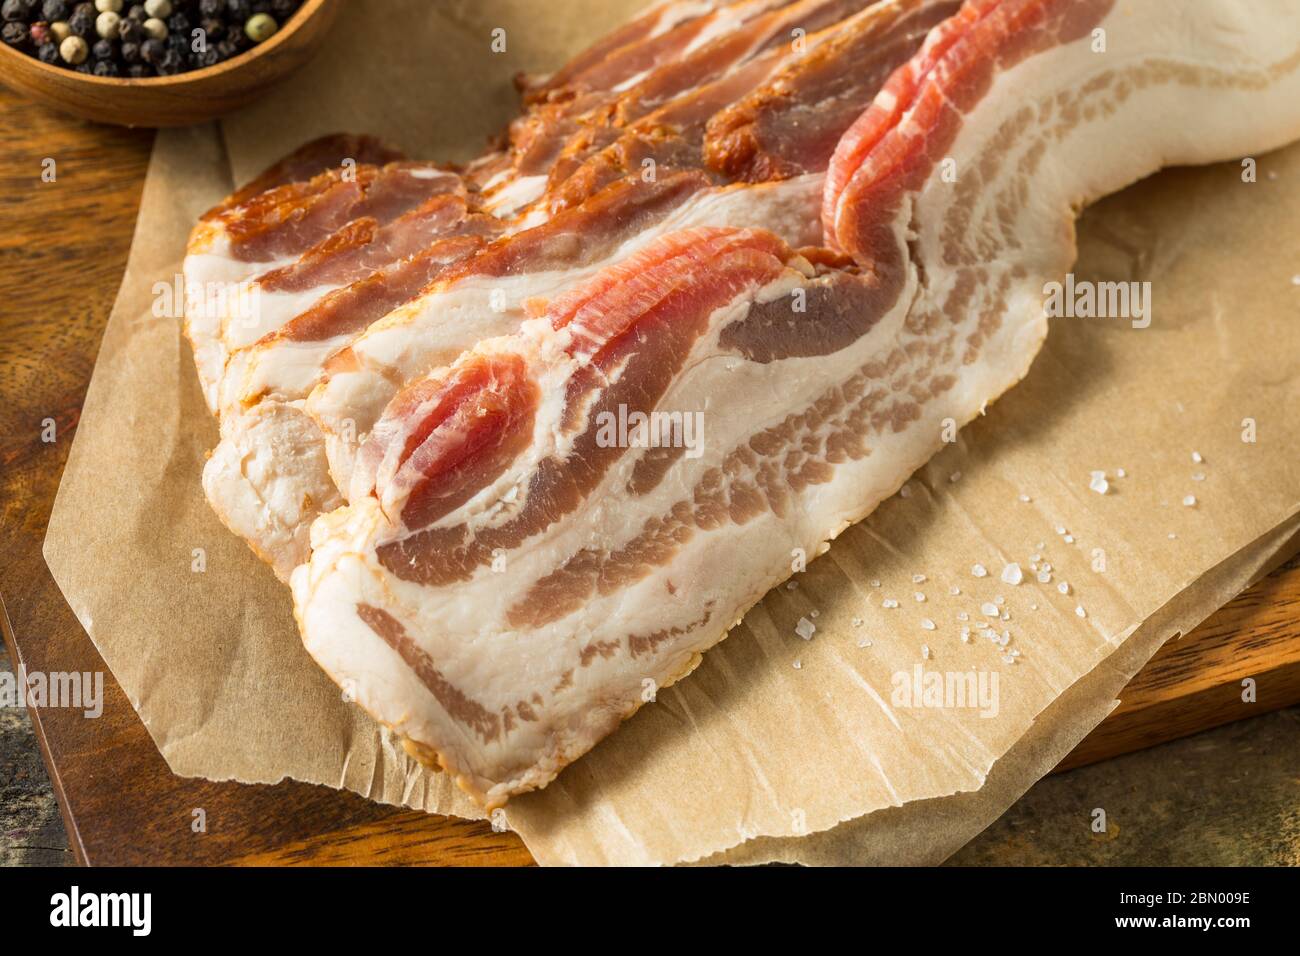 Raw Organic Uncured Salty Bacon Ready to Cook Stock Photo